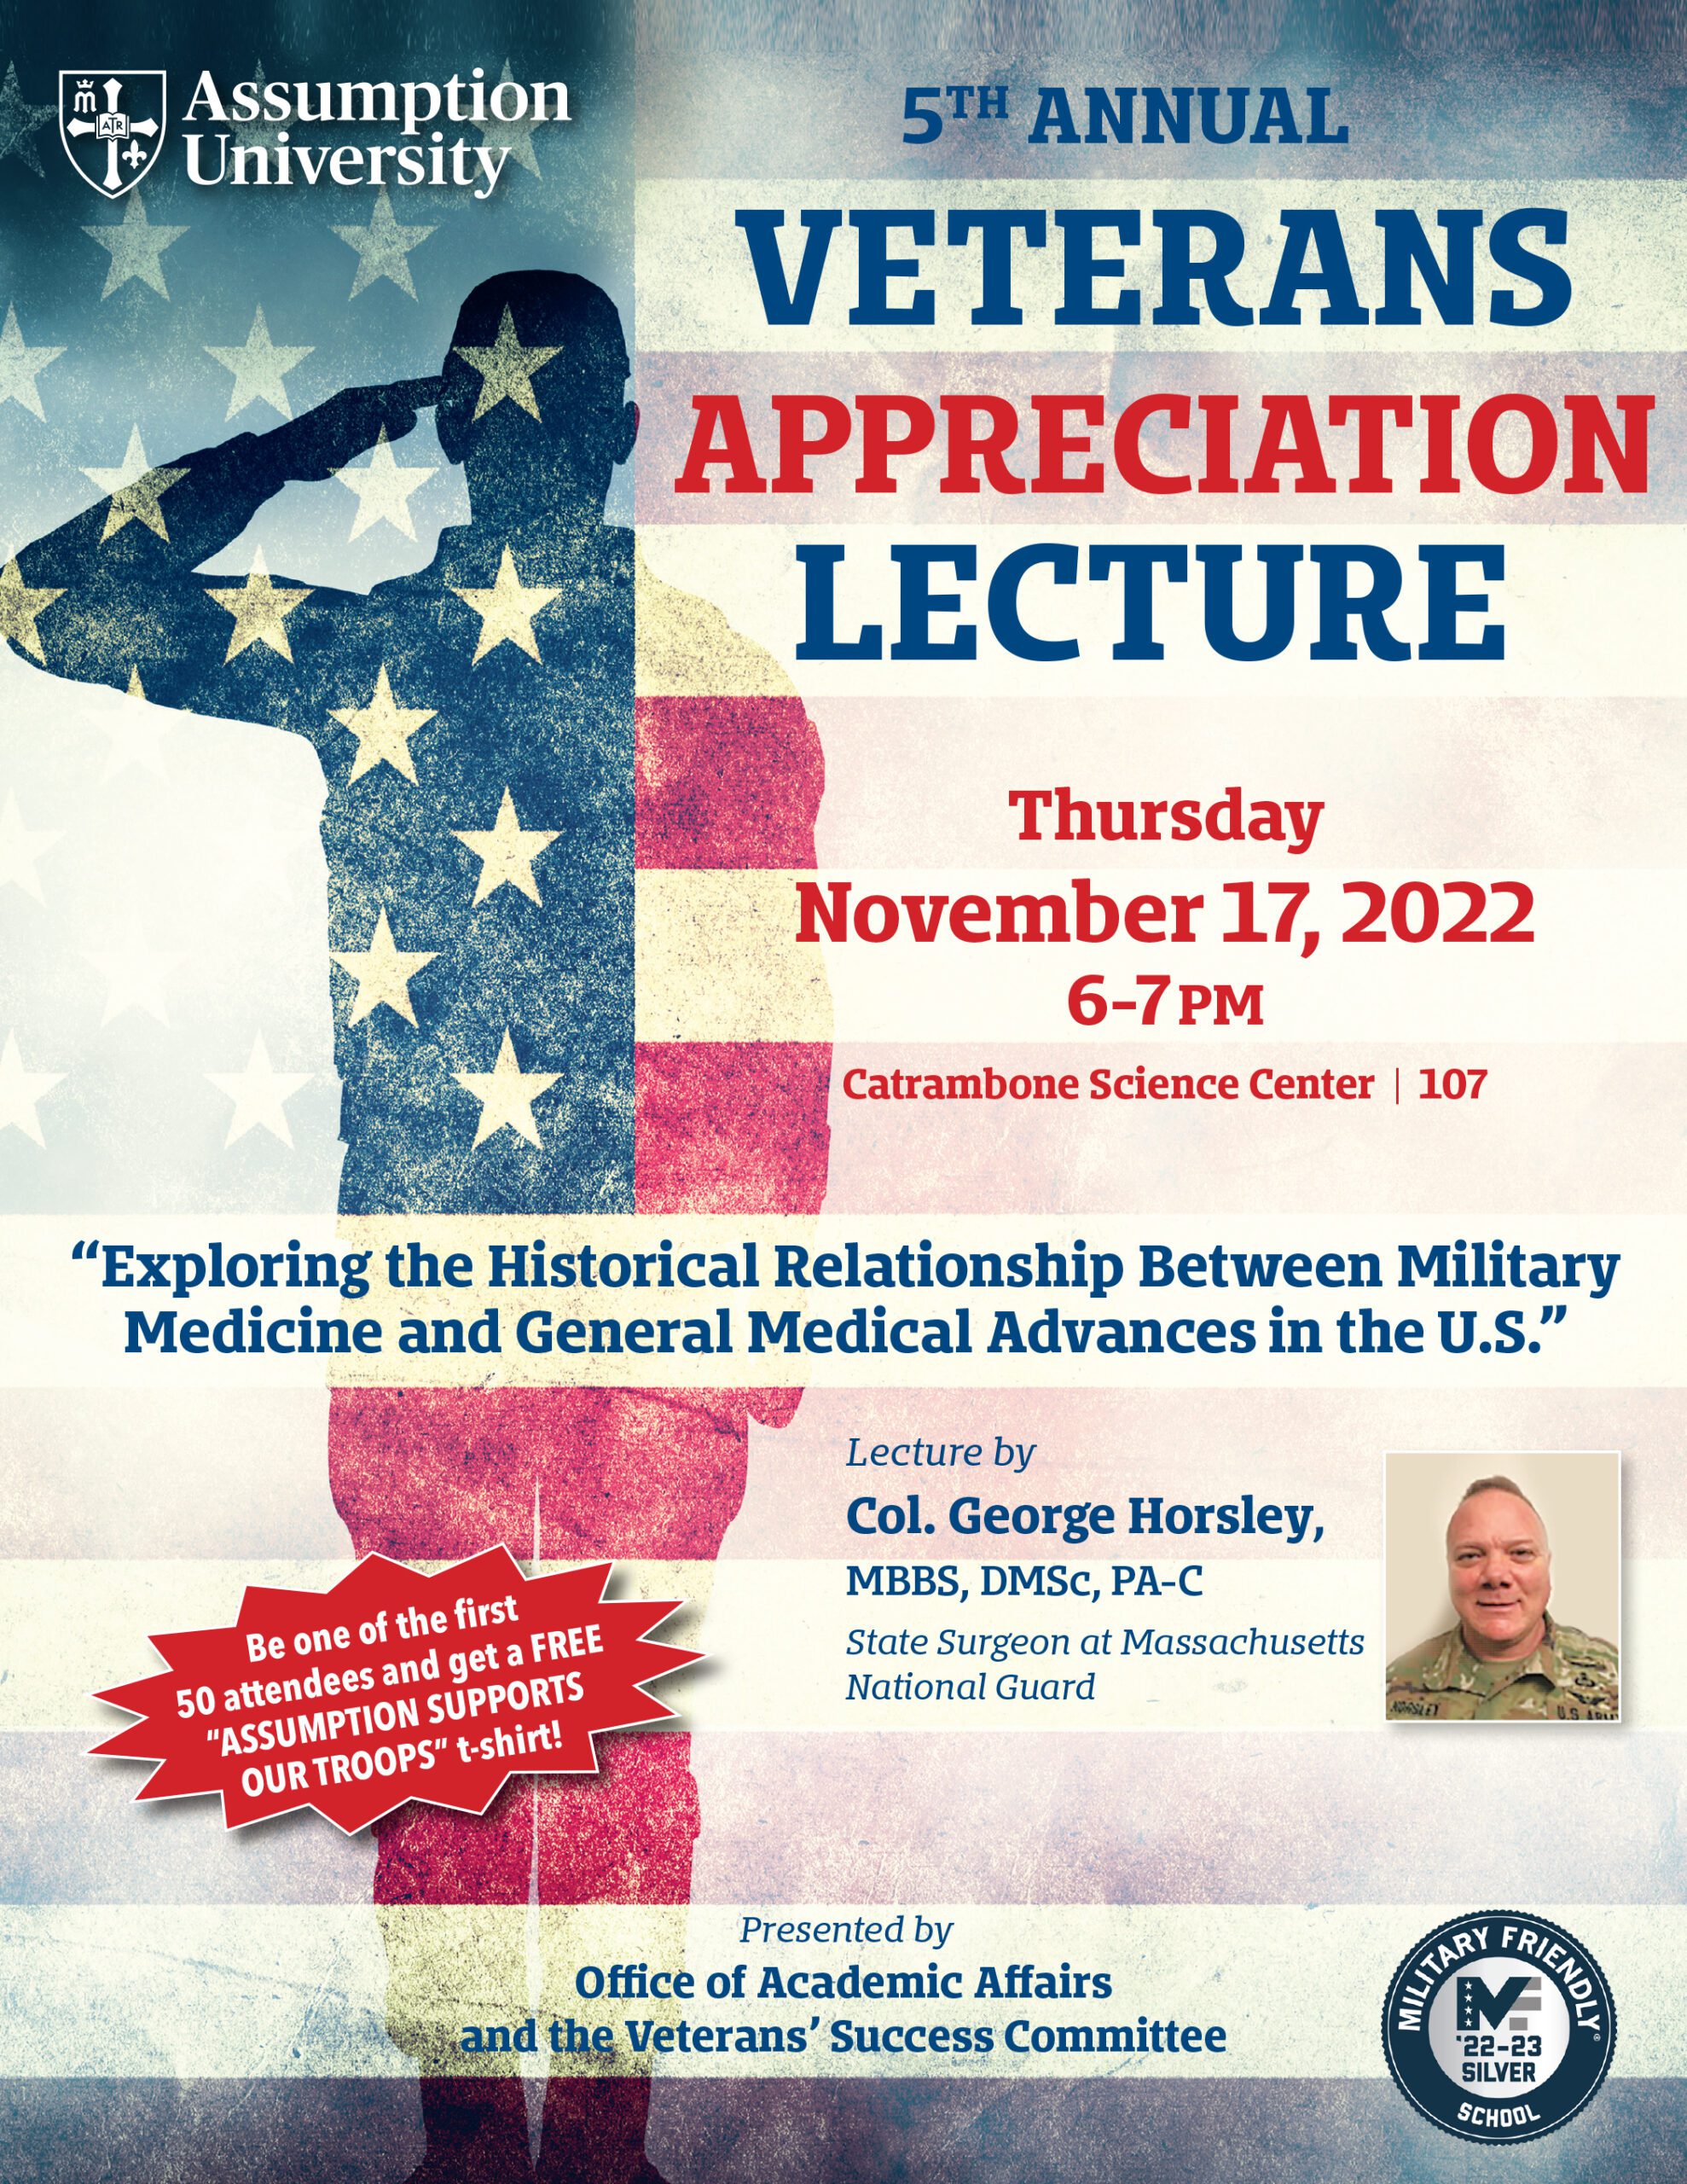 Assumption University's 5th annual Veterans Appreciation Lecture featuring Col. George Horsley, State Surgeon at Massachusetts National Guard